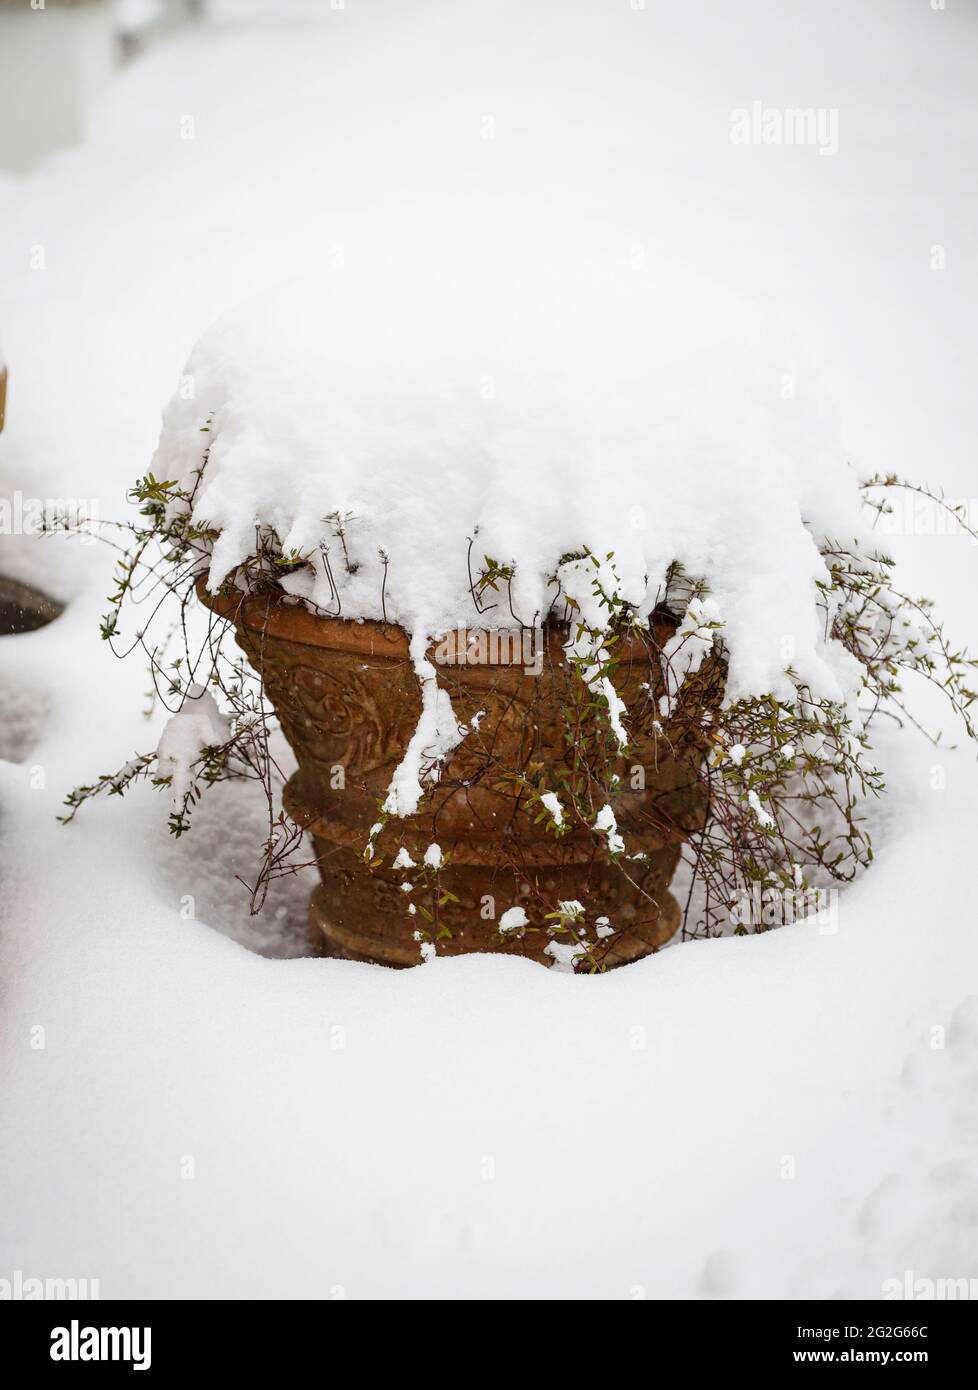 Savory in a terracotta pot in the snow Stock Photo